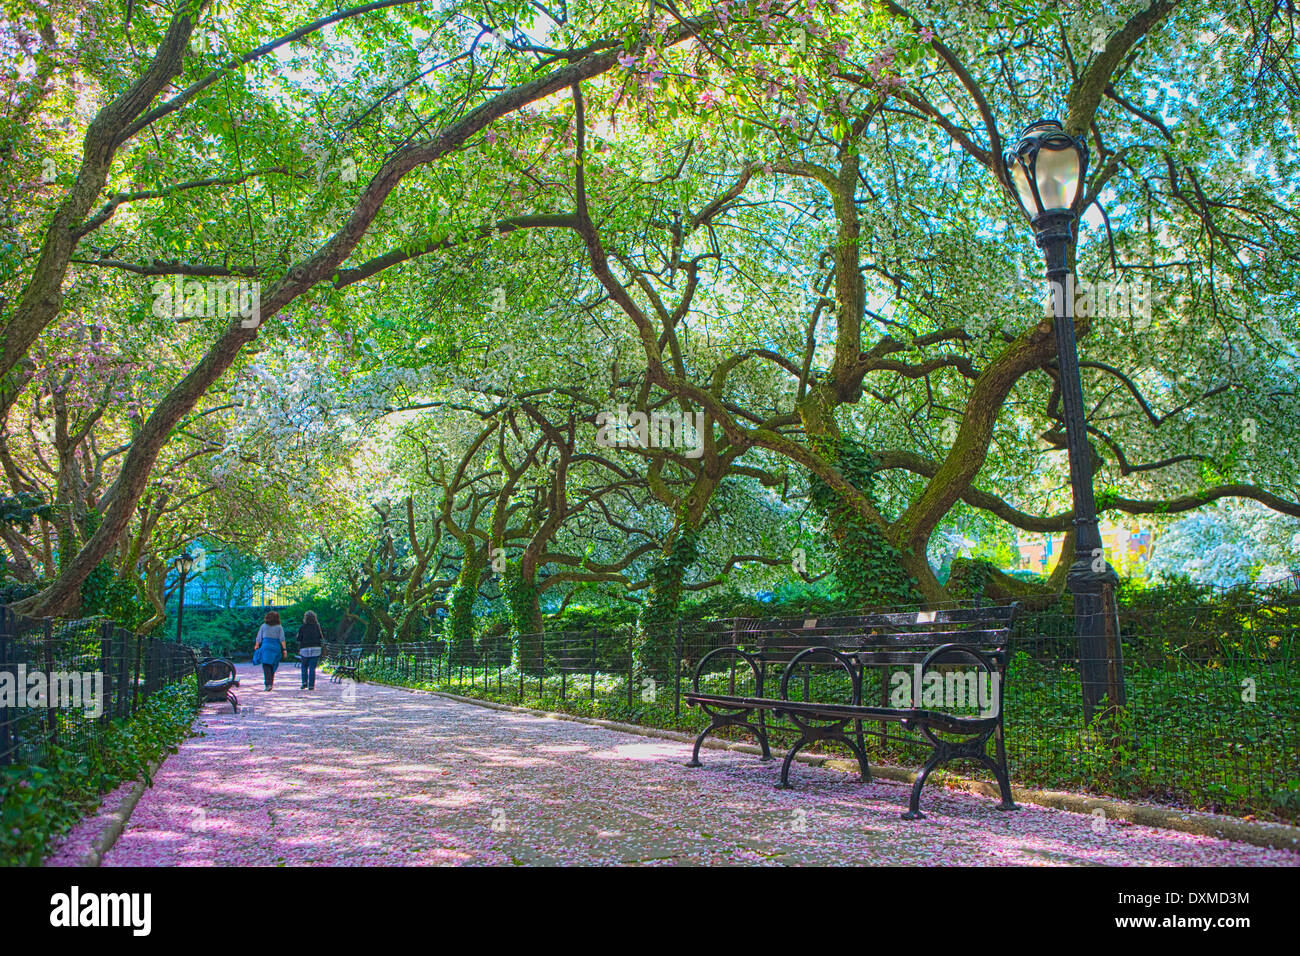 A Walk through Crabapple trees in blossom in the Central Park Conservatory, New York Stock Photo